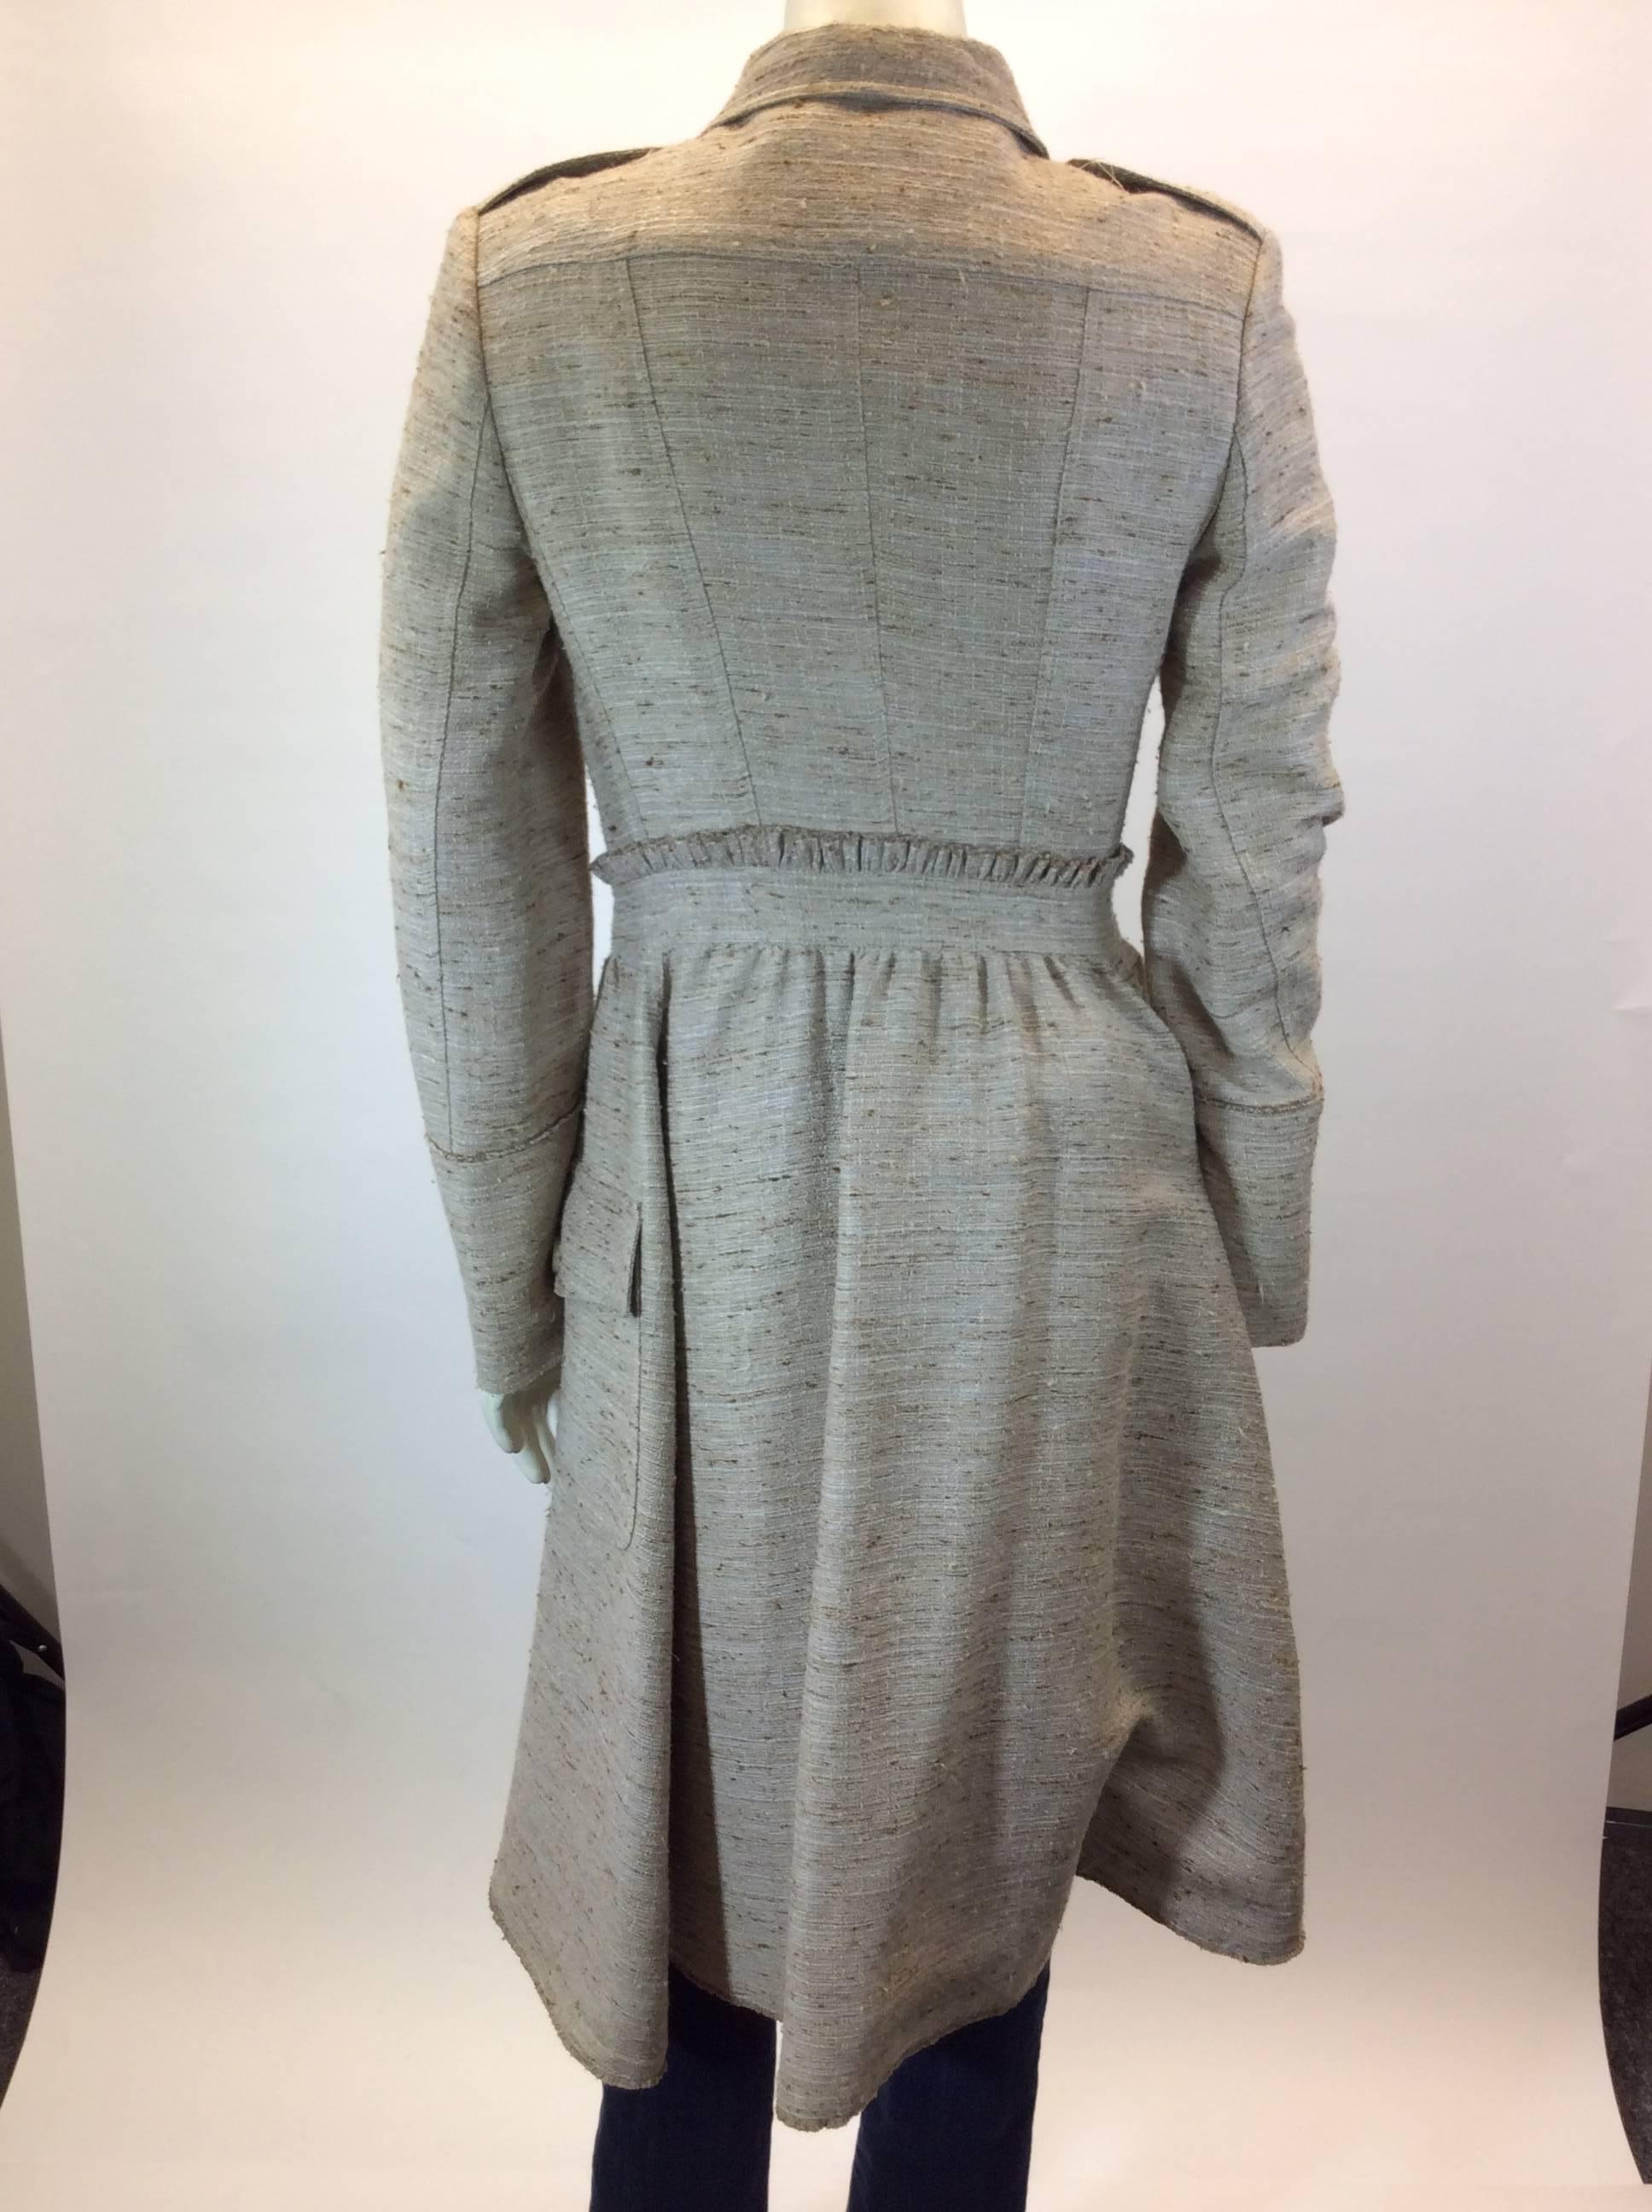 Burberry Tan Tweed Size 4 Coat w/ leather belt  In Excellent Condition For Sale In Narberth, PA